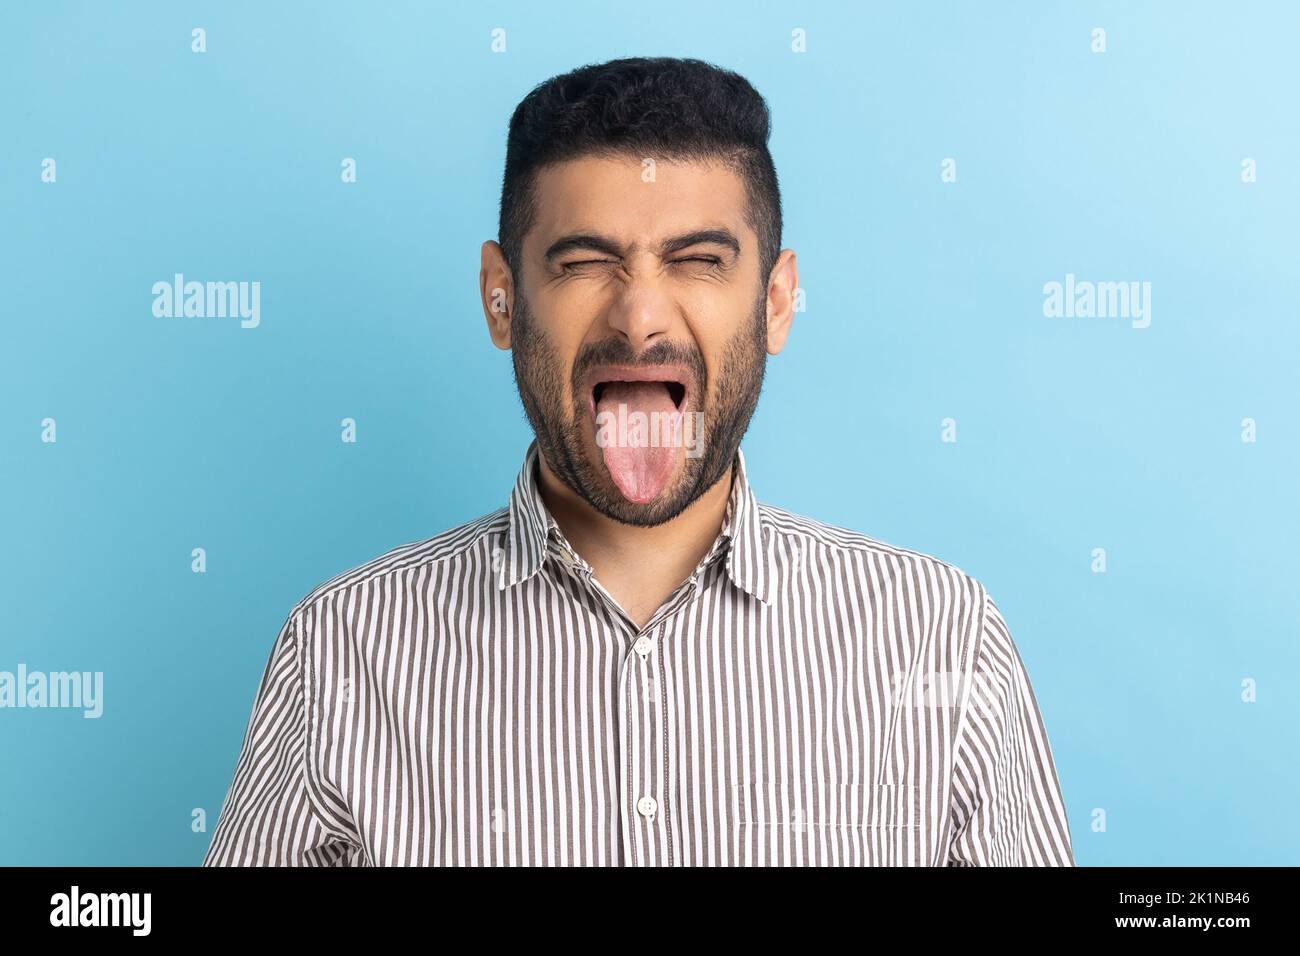 Photo of young handsome foolish crazy businessman, keeping eyes closed and showing tongue out, expressing positive emotions, wearing striped shirt. Indoor studio shot isolated on blue background. Stock Photo